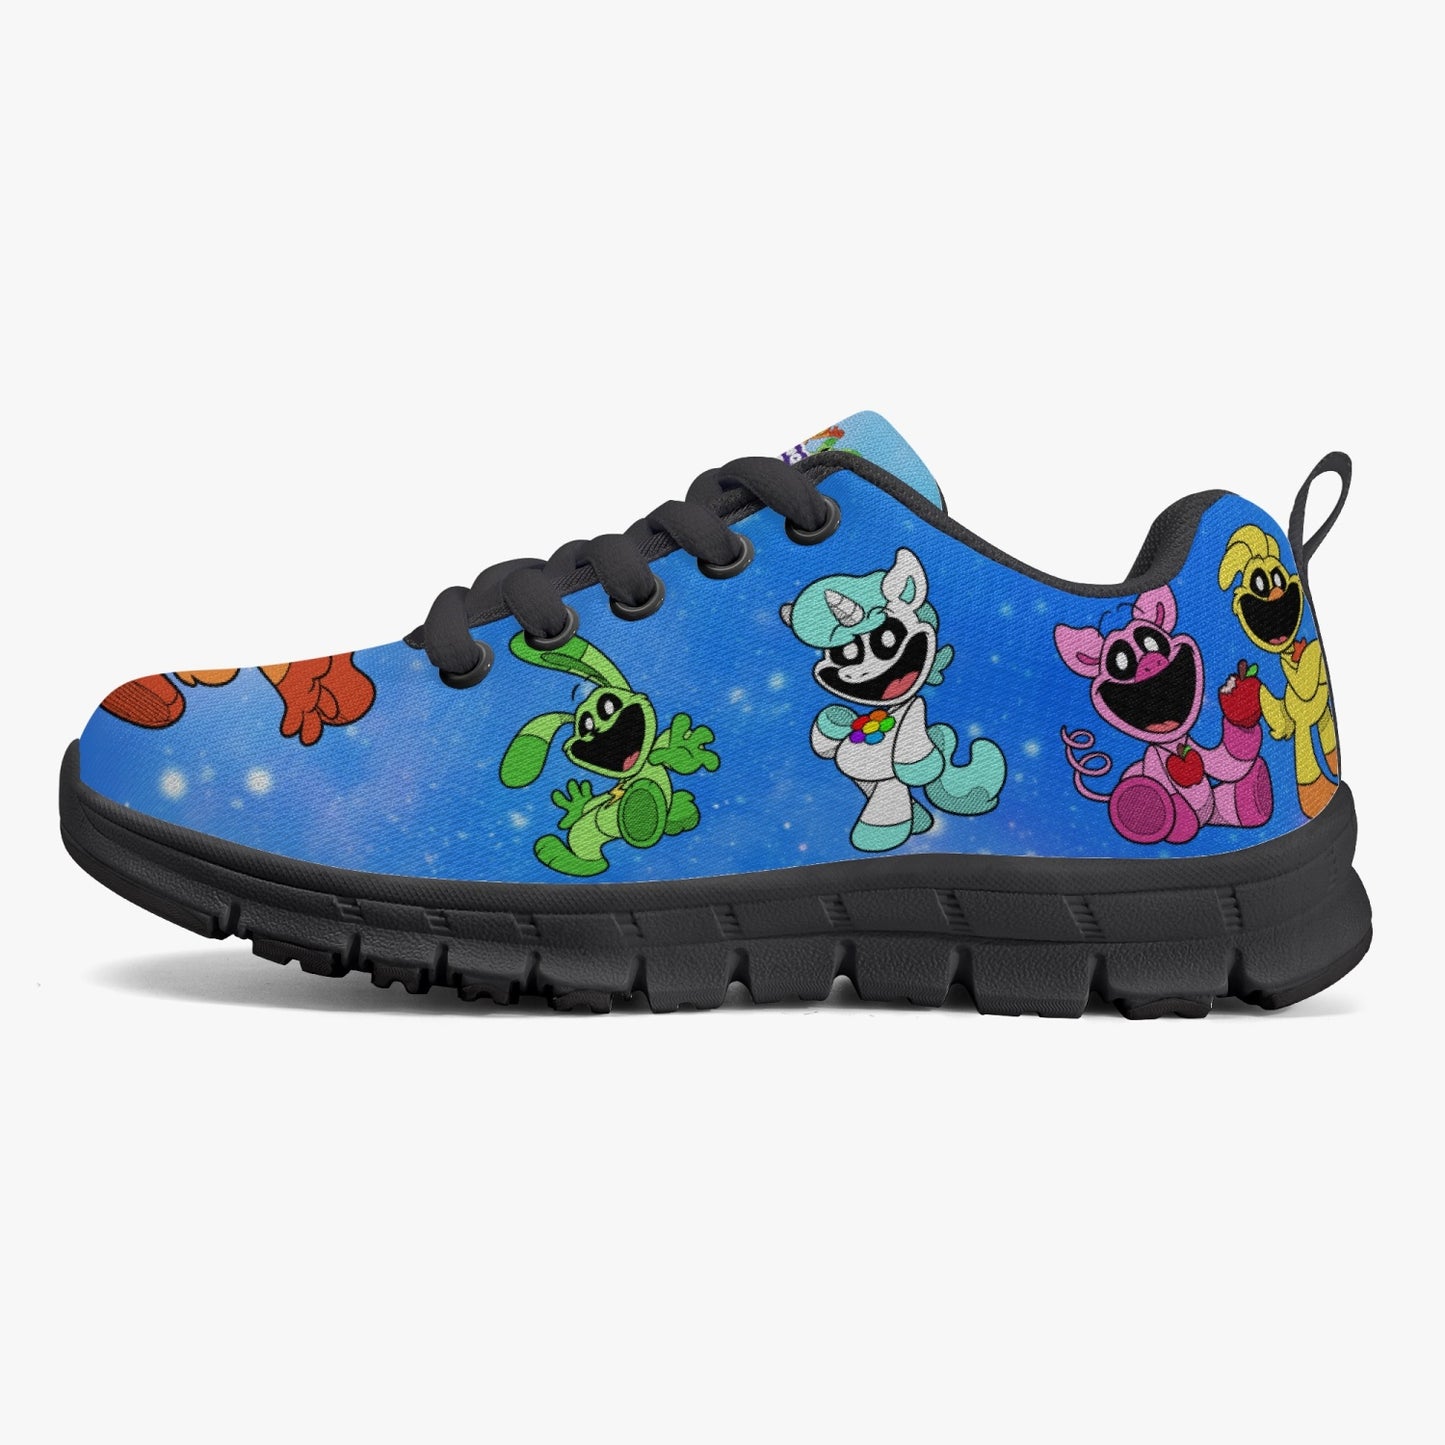 Kids' Smiling Critters Lightweight Mesh Sneakers